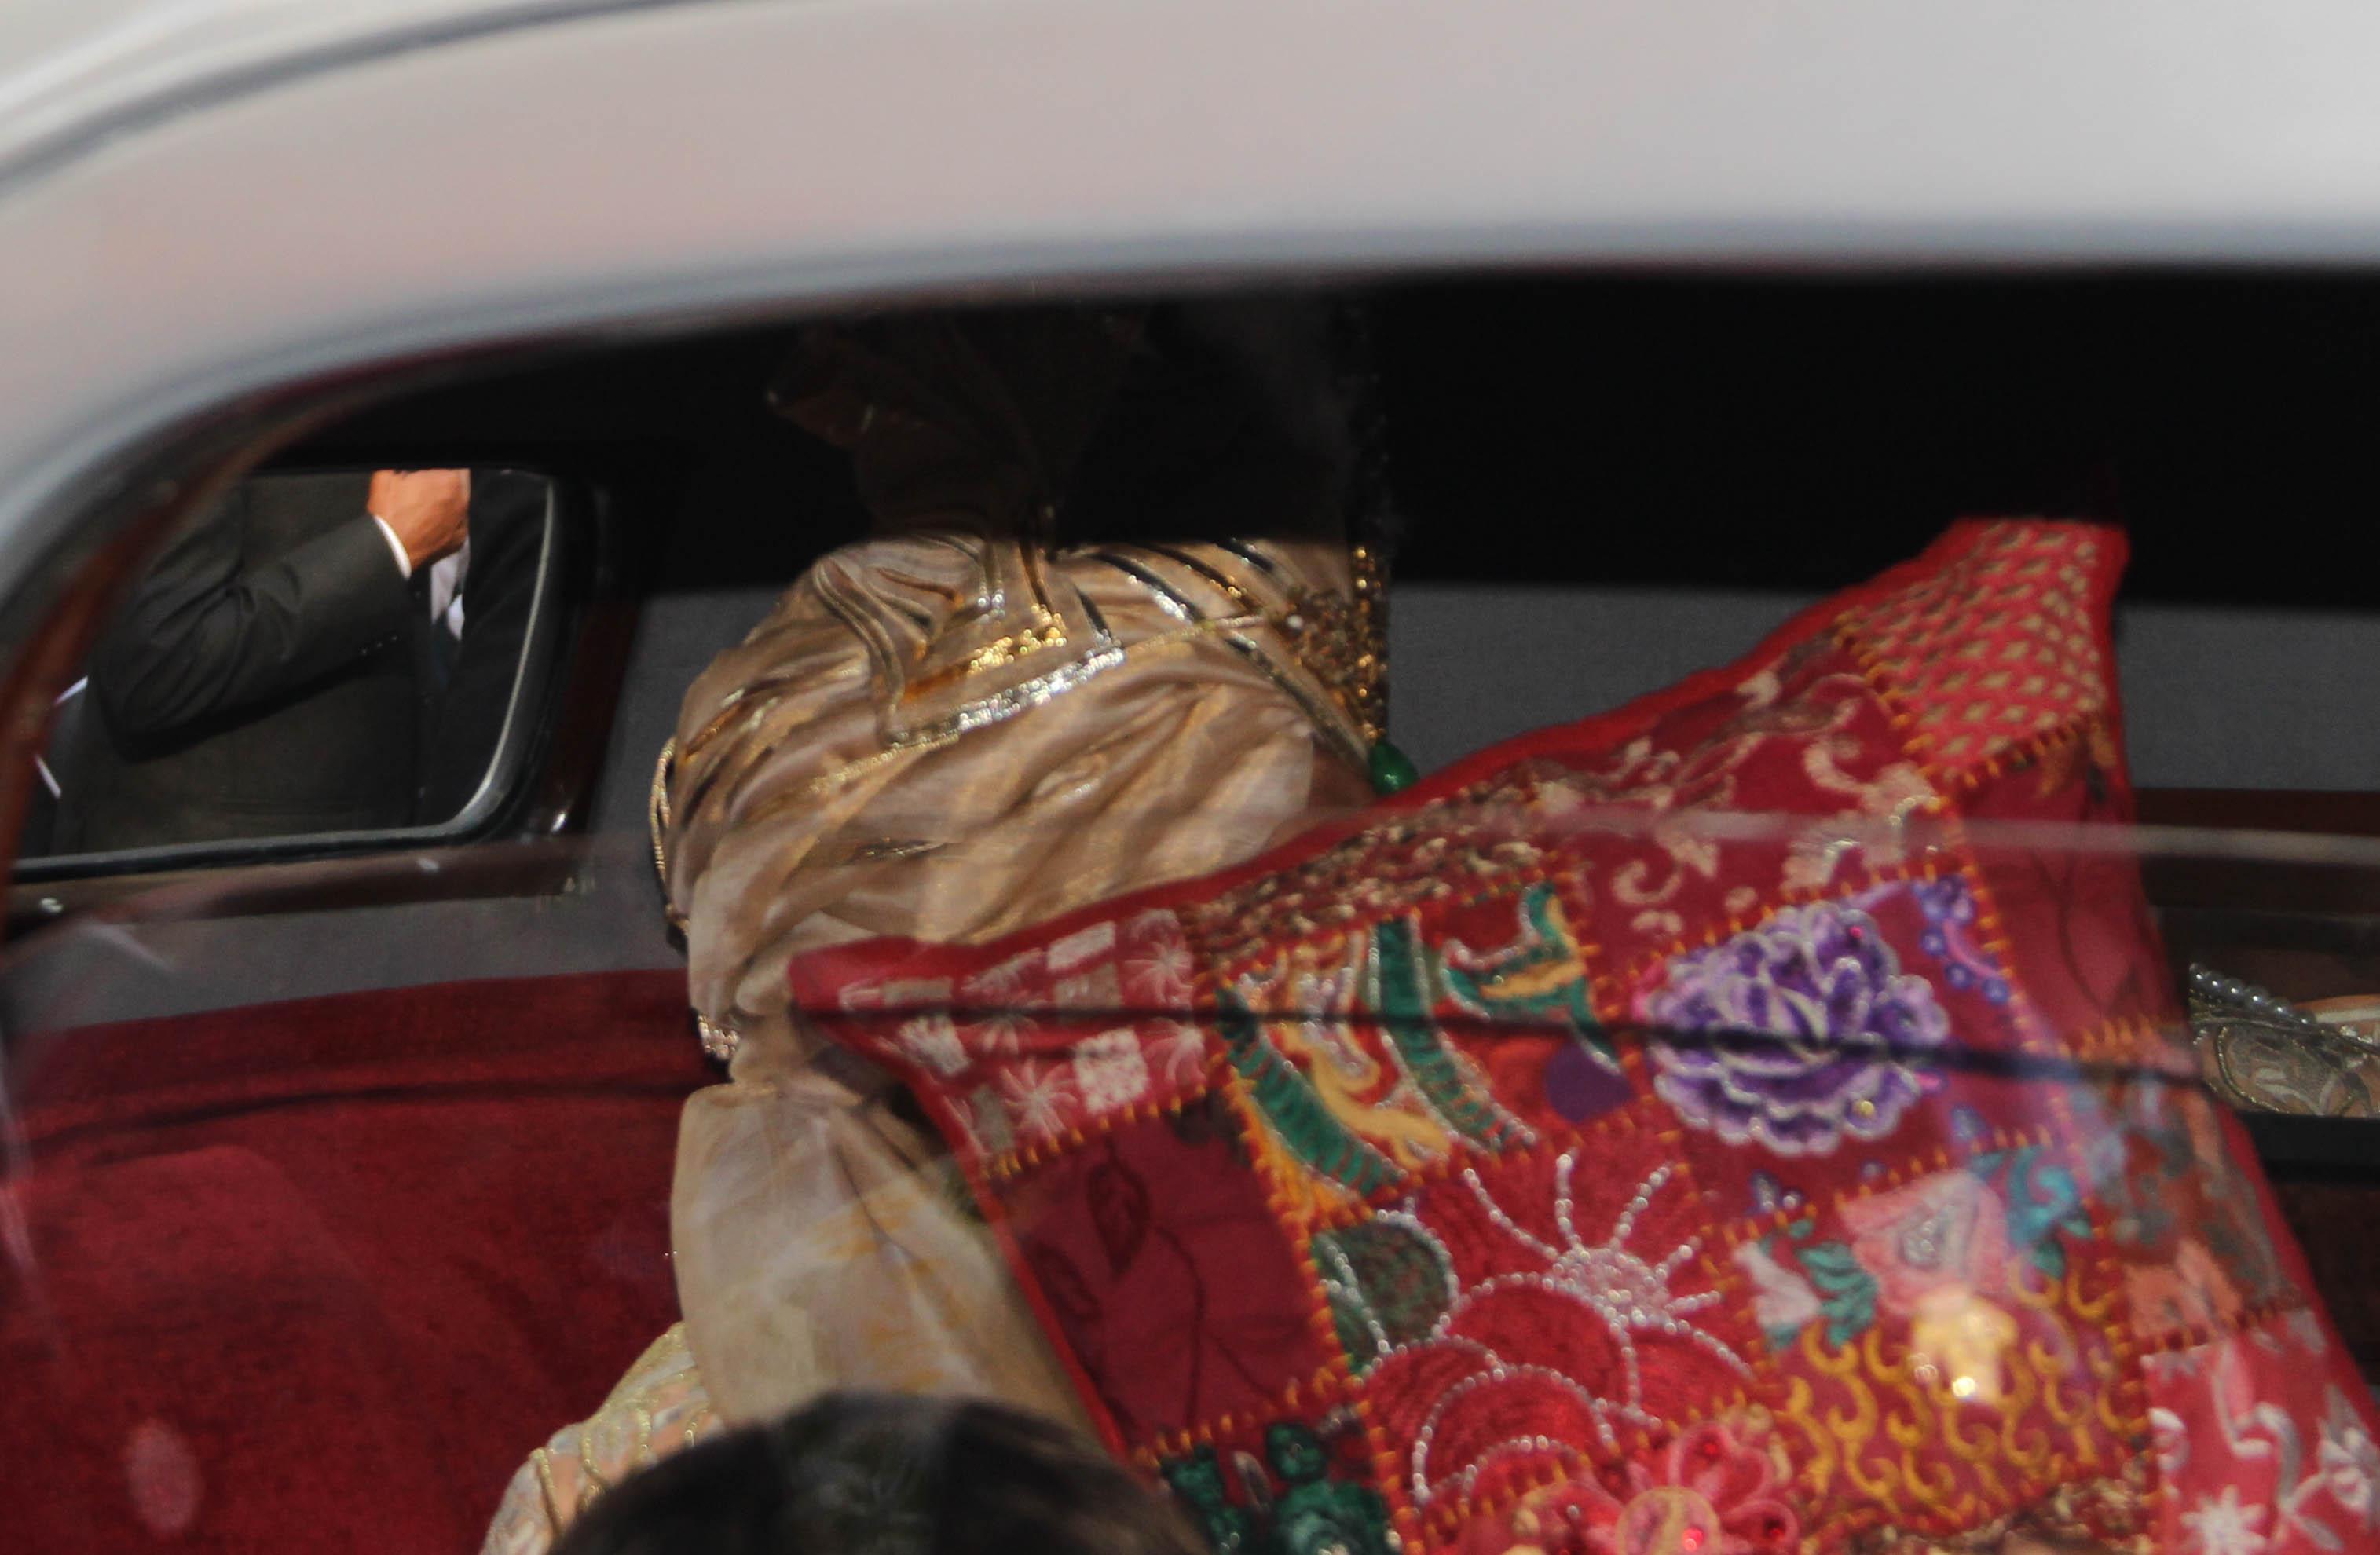 In photo: Anand Piramal covers his face with a pillow as the paparazzi try to get a glimpse of him.